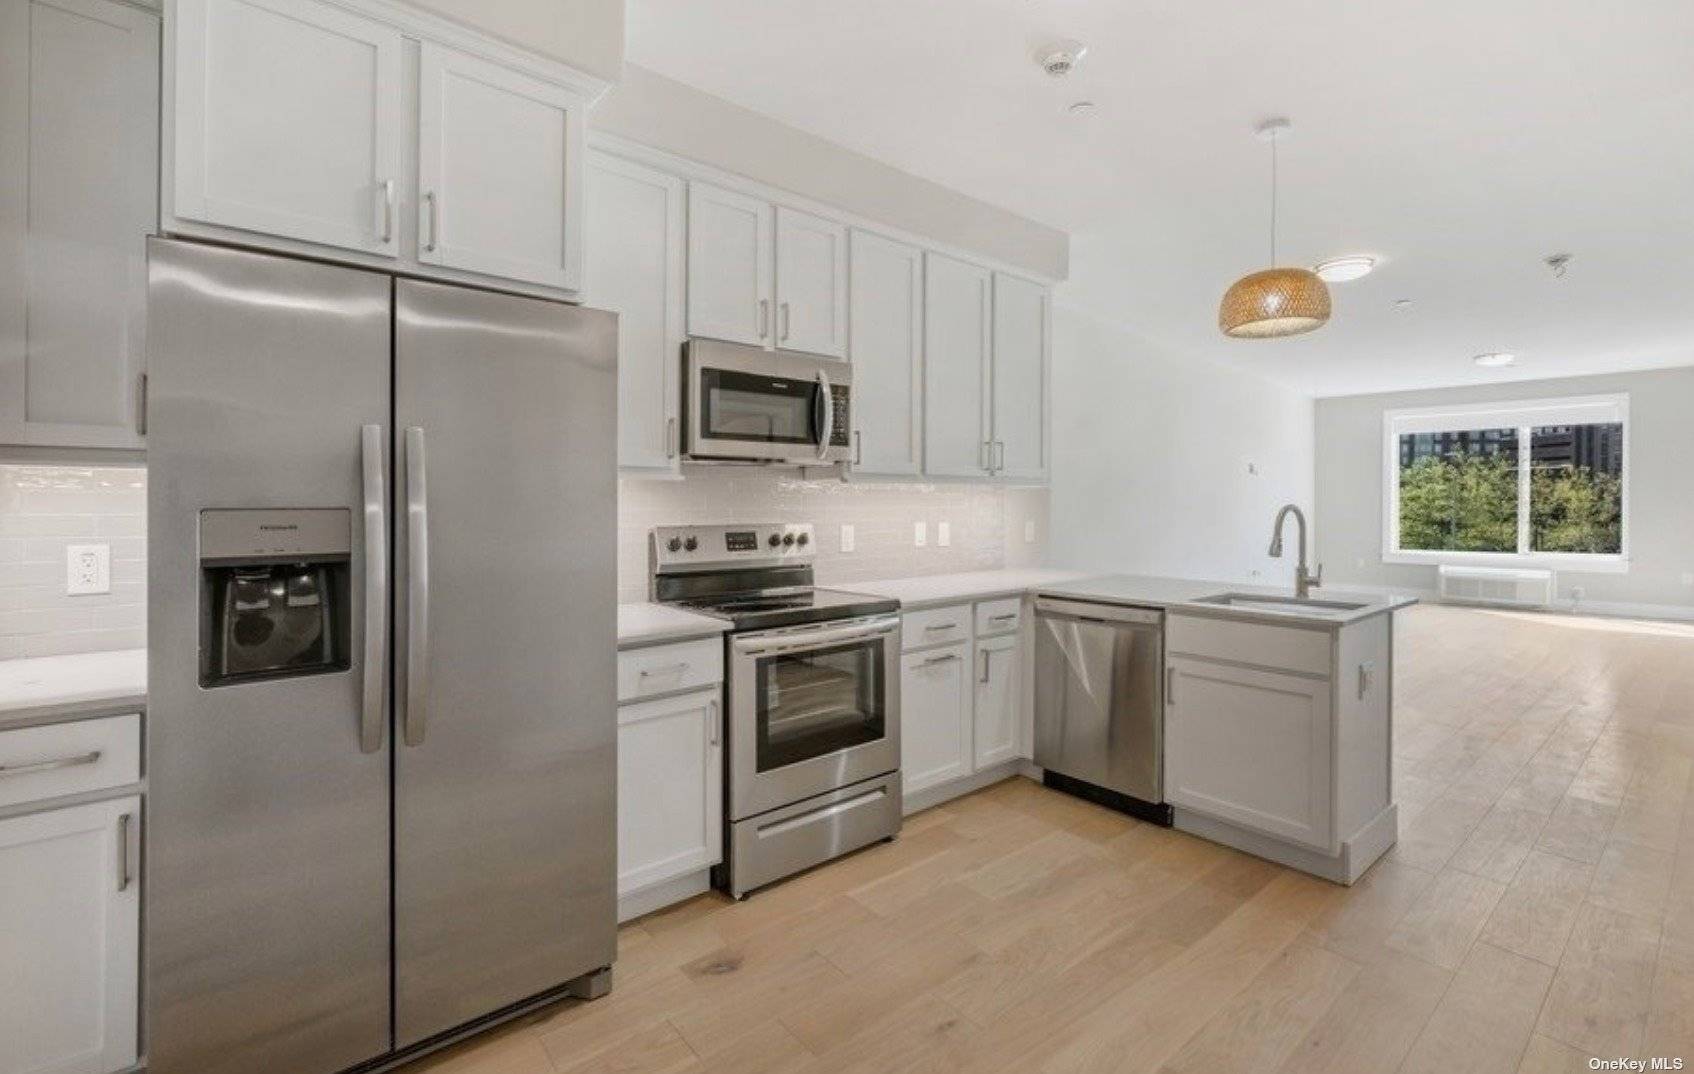 This light filled open concept floor plan offers stainless steel appliances, caesarstone countertops, custom cabinetry, in unit washer dryer, and rainfall showers.